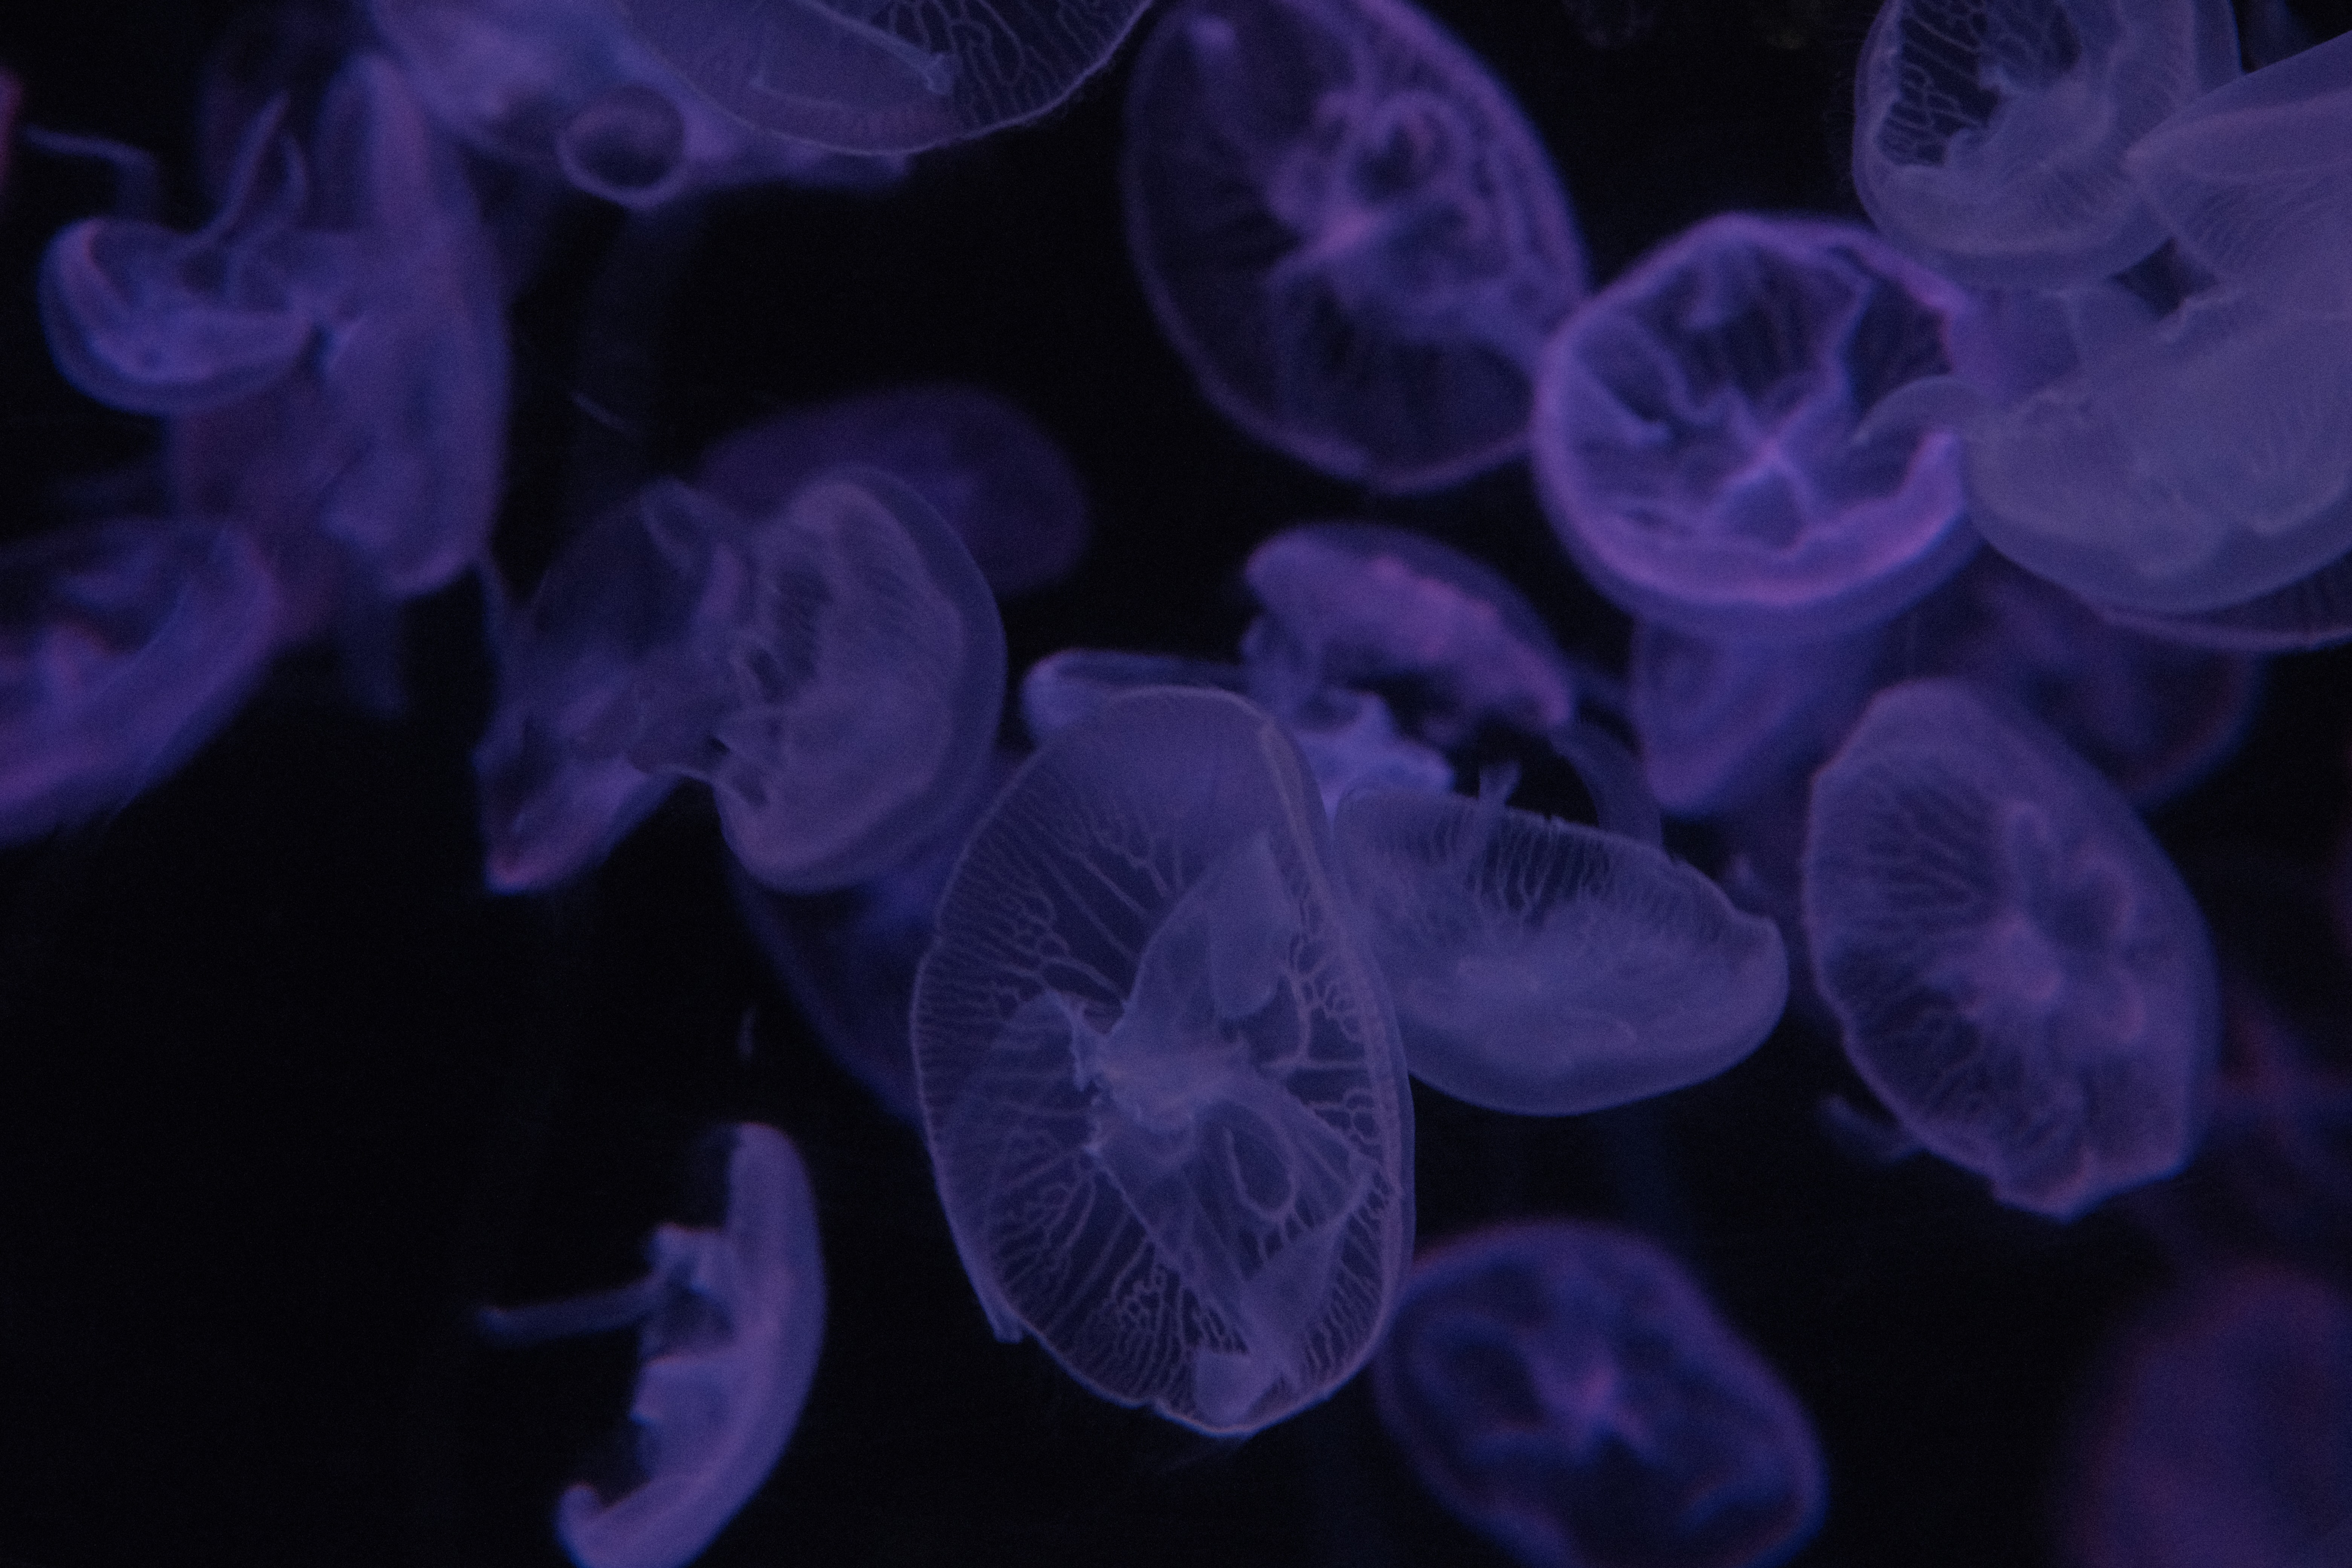 dark, jellyfish, violet, purple, handsomely, it's beautiful wallpapers for tablet